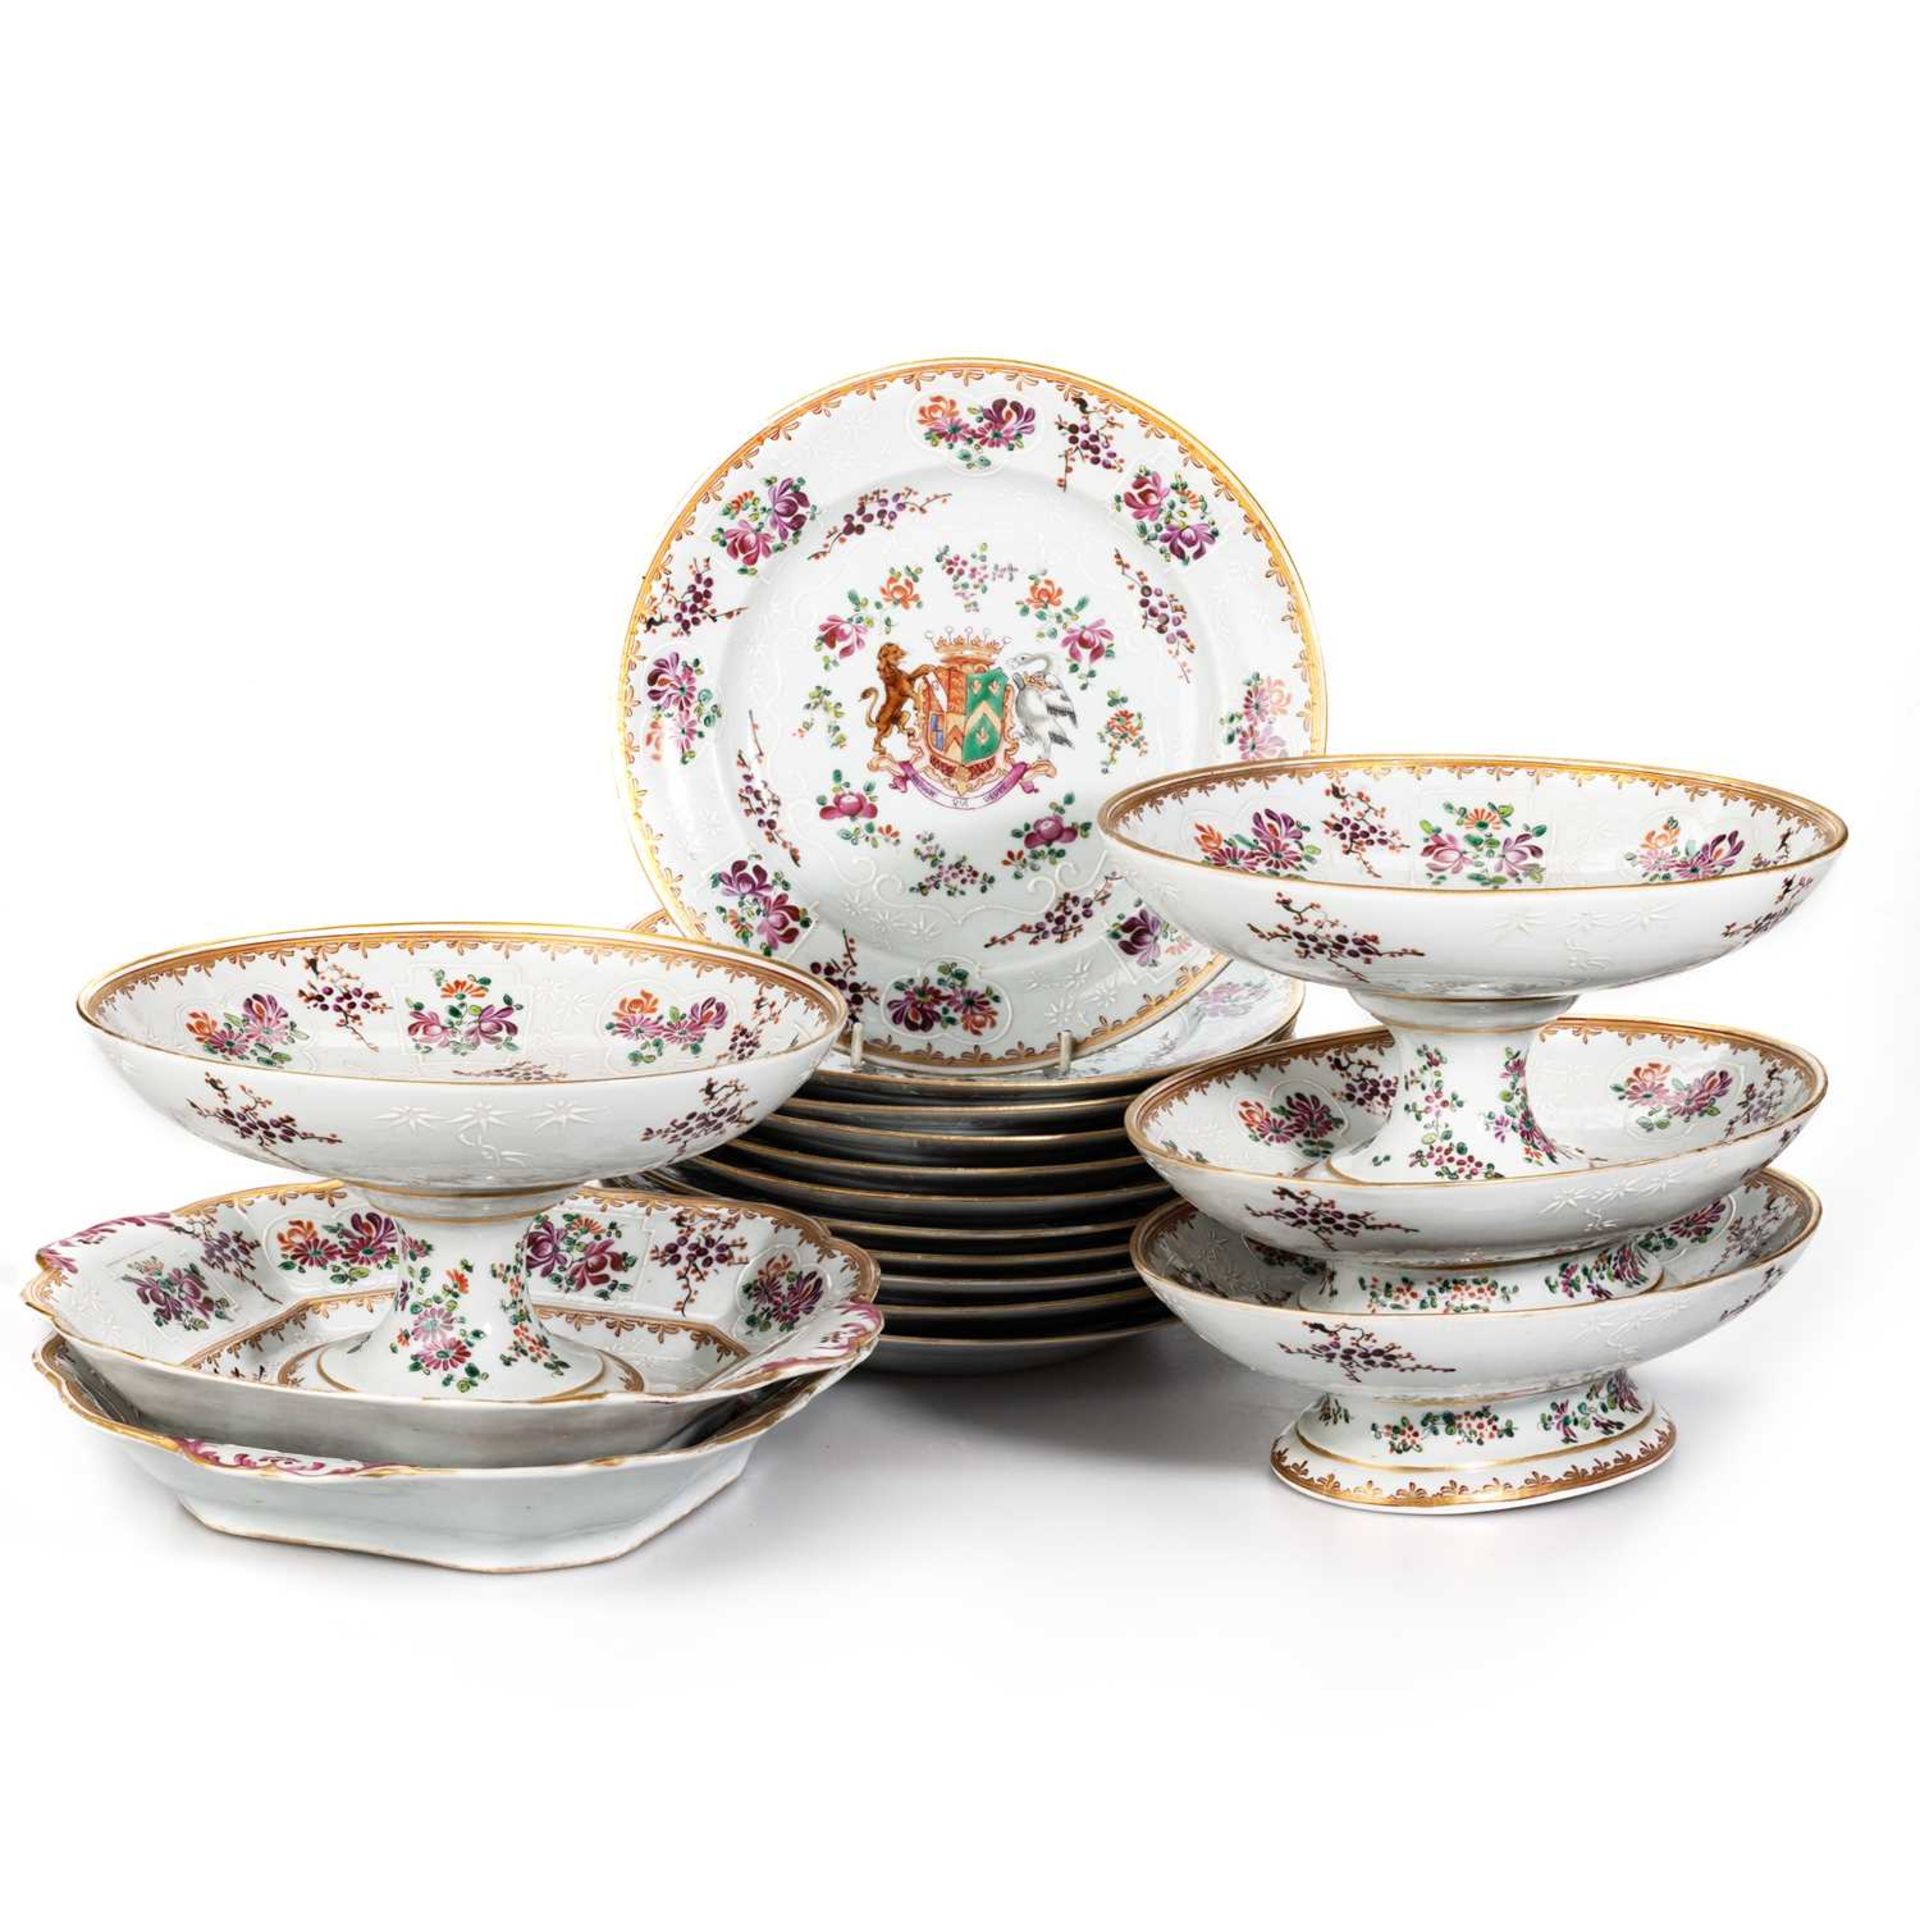 A SAMSON PORCELAIN DESSERT SERVICE IN CHINESE EXPORT ARMORIAL STYLE